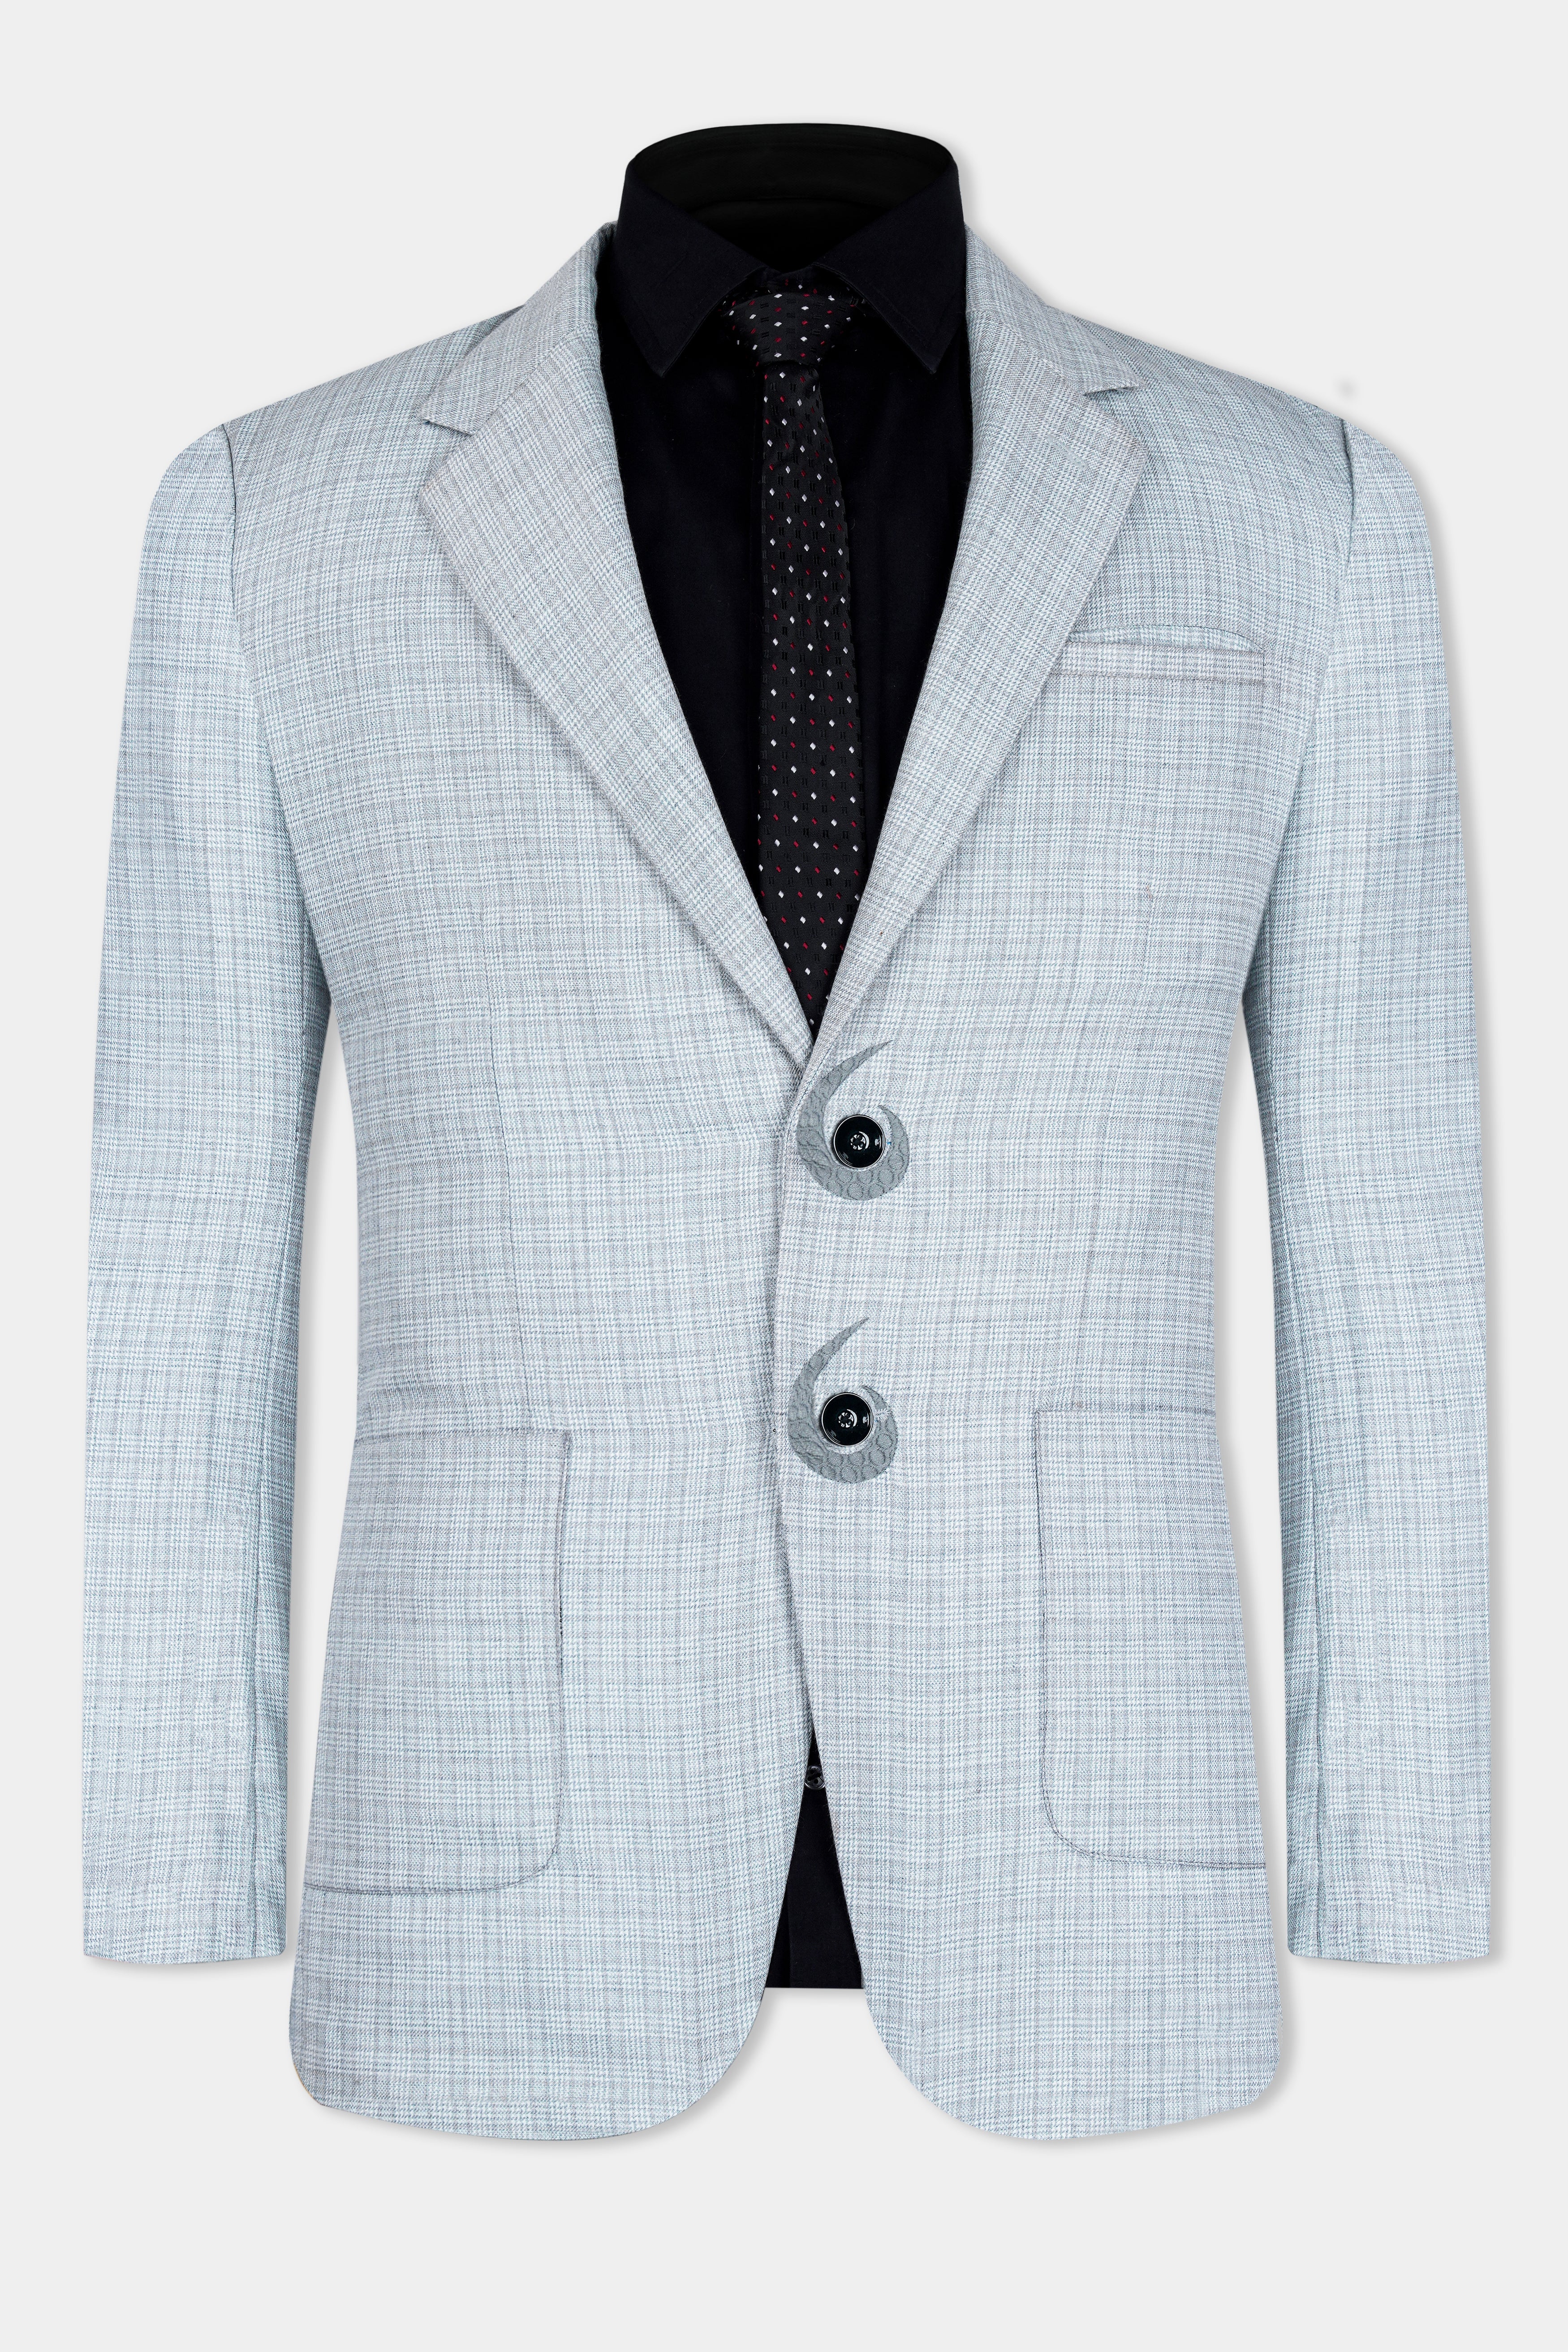 Tiara Gray Checkered with Embroidered Wool Rich Designer Blazer BL2929-SB-PP-D58-36, BL2929-SB-PP-D58-38, BL2929-SB-PP-D58-40, BL2929-SB-PP-D58-42, BL2929-SB-PP-D58-44, BL2929-SB-PP-D58-46, BL2929-SB-PP-D58-48, BL2929-SB-PP-D58-50, BL2929-SB-PP-D58-52, BL2929-SB-PP-D58-54, BL2929-SB-PP-D58-56, BL2929-SB-PP-D58-58, BL2929-SB-PP-D58-60